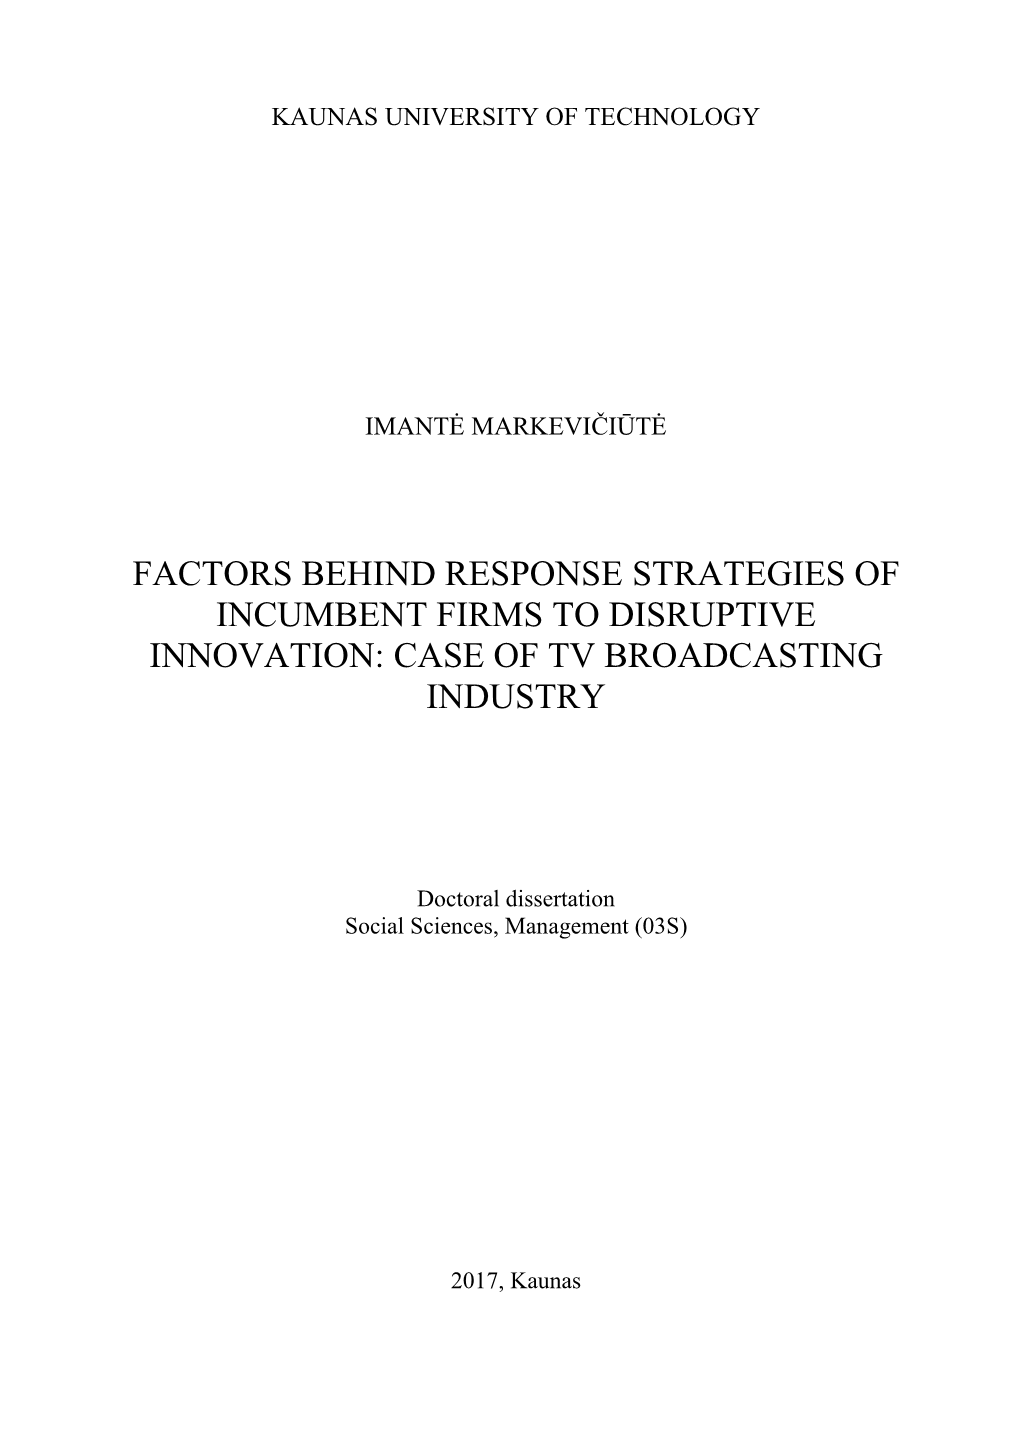 Factors Behind Response Strategies of Incumbent Firms to Disruptive Innovation: Case of Tv Broadcasting Industry